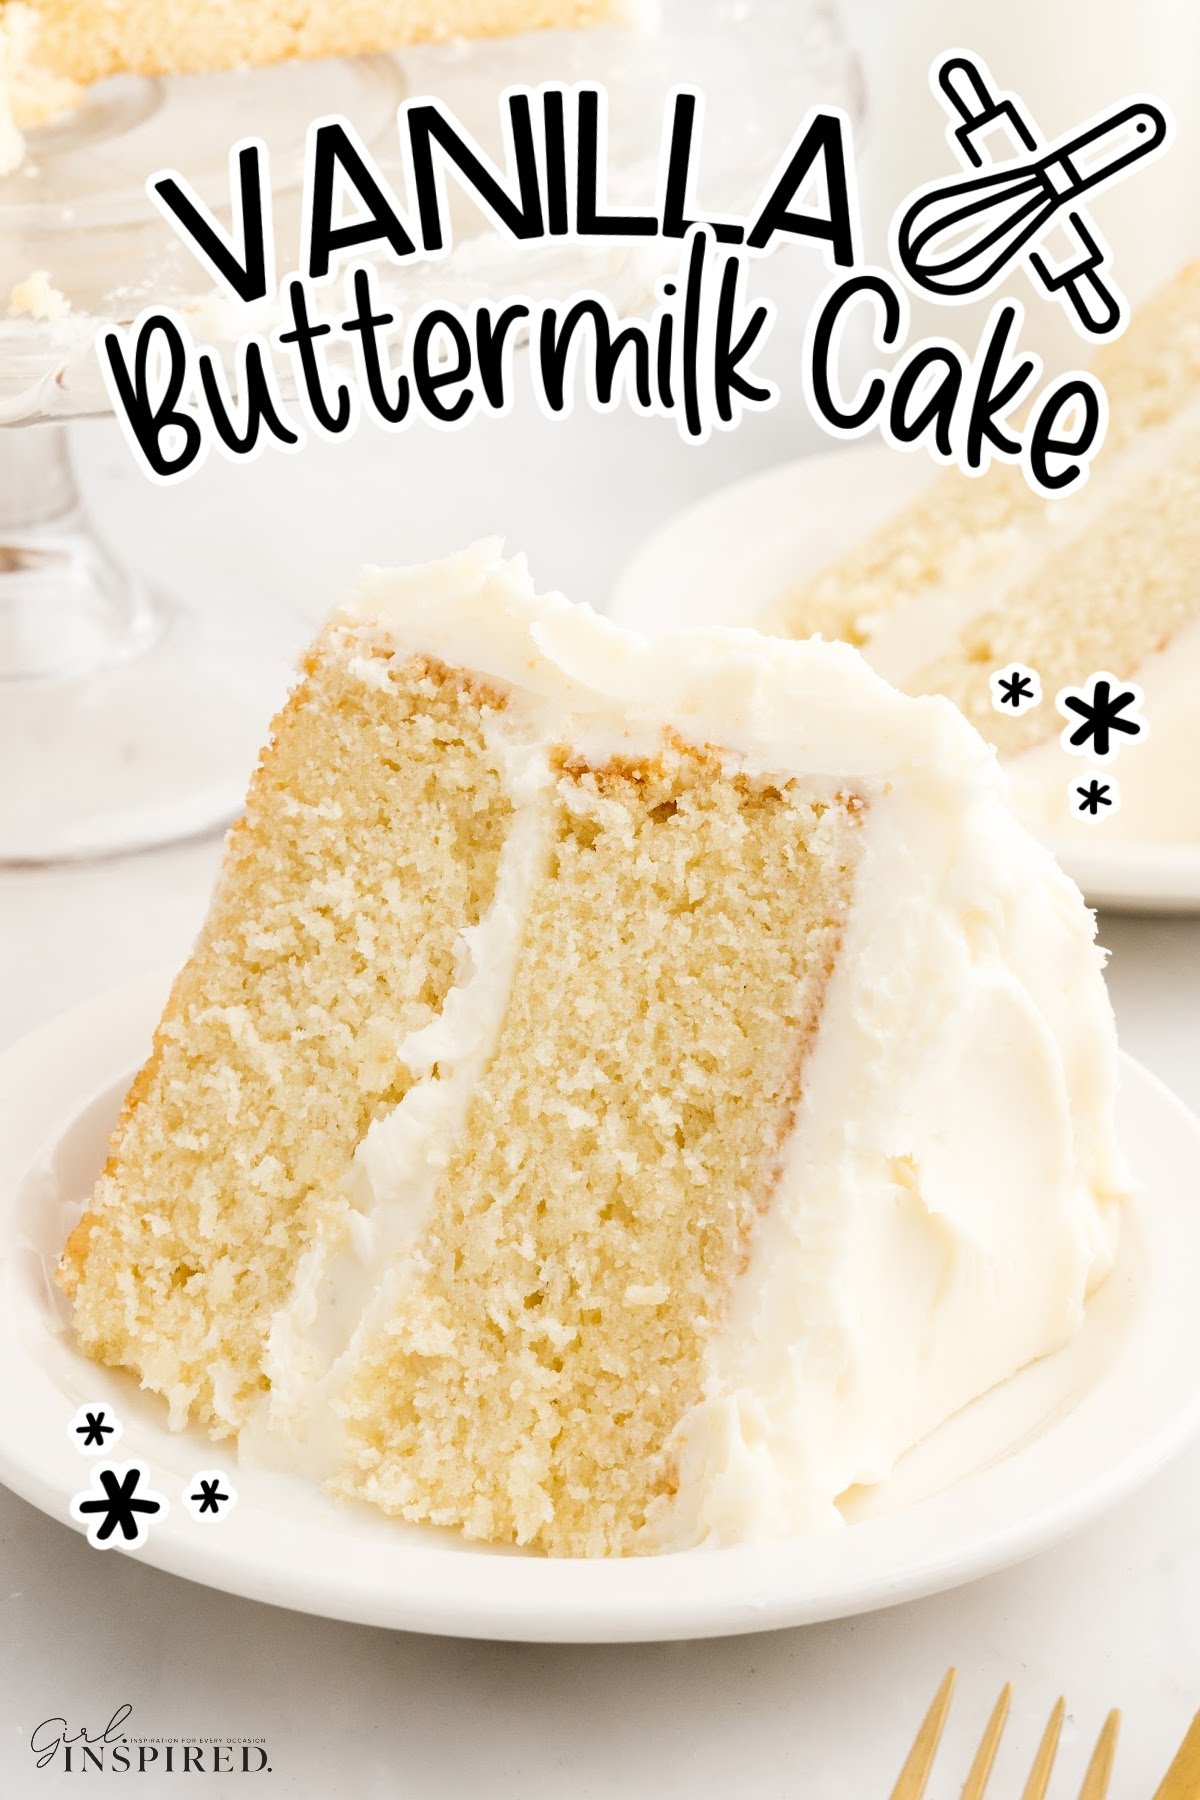 A slice of Vanilla Buttermilk Cake on a plate with text overlay.